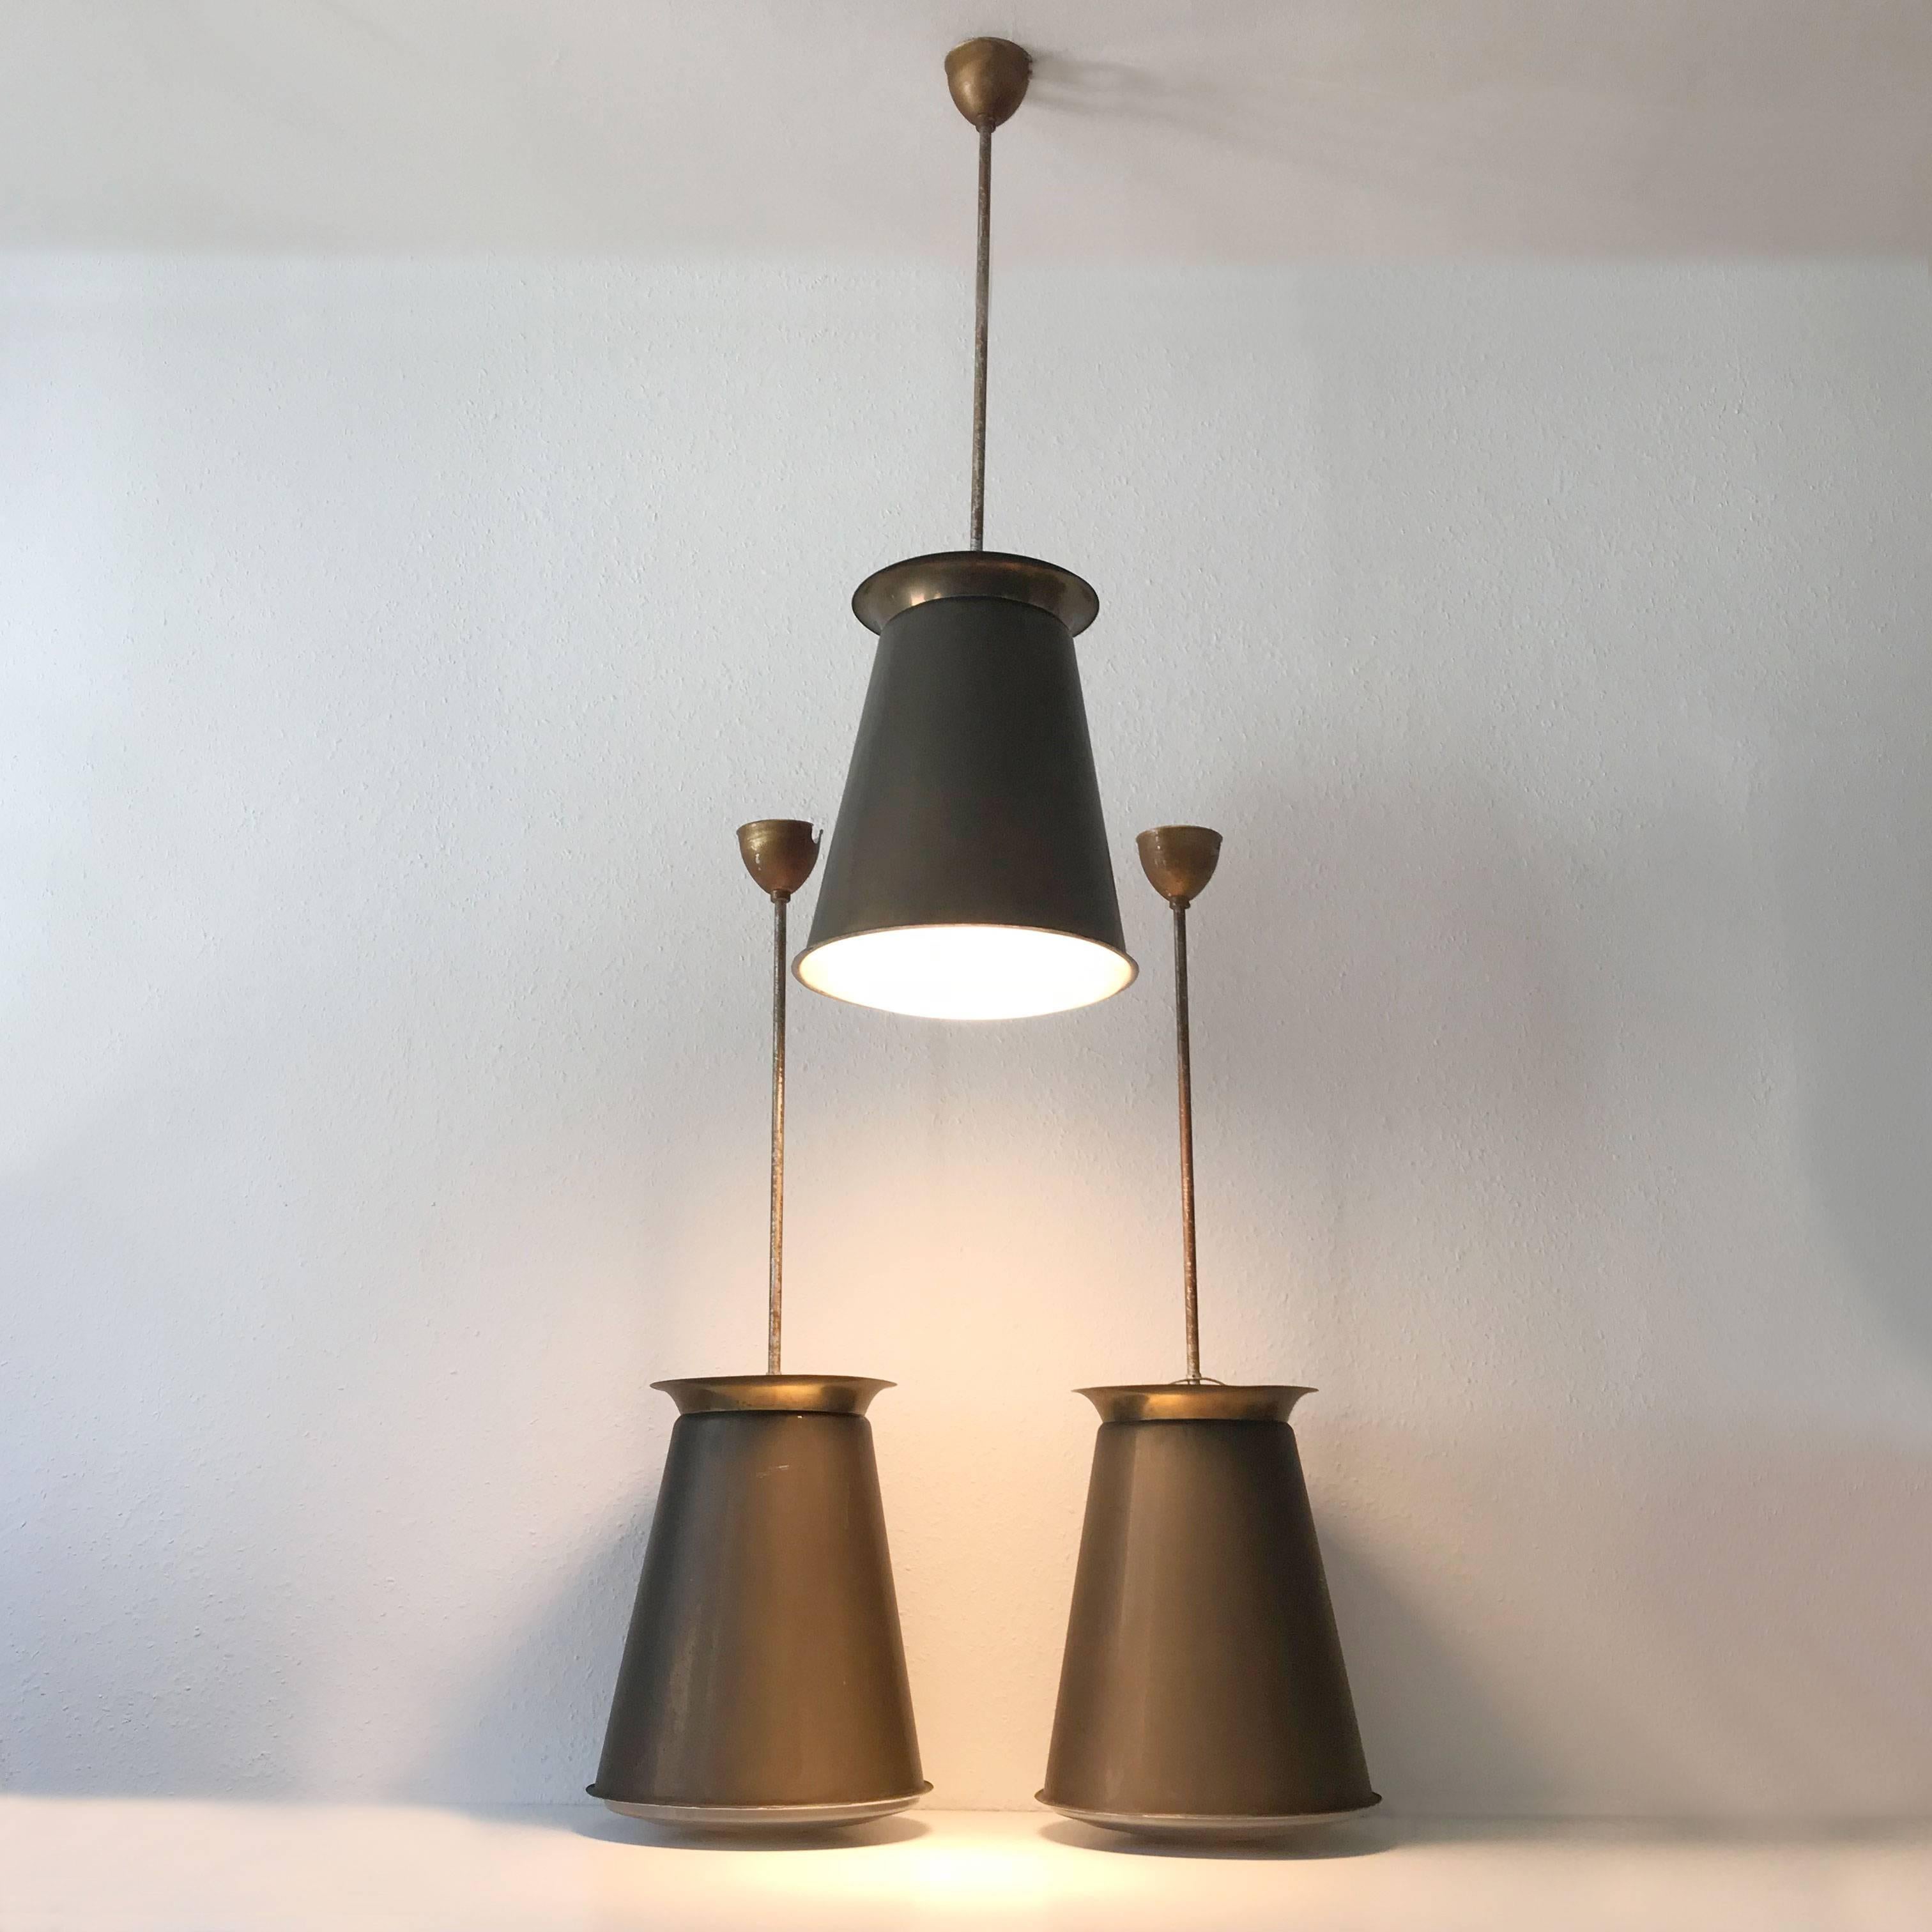 Exceptional Bauhaus Pendant Lamp by Adolf Meyer for Zeiss Ikon, 1930s, Germany For Sale 9